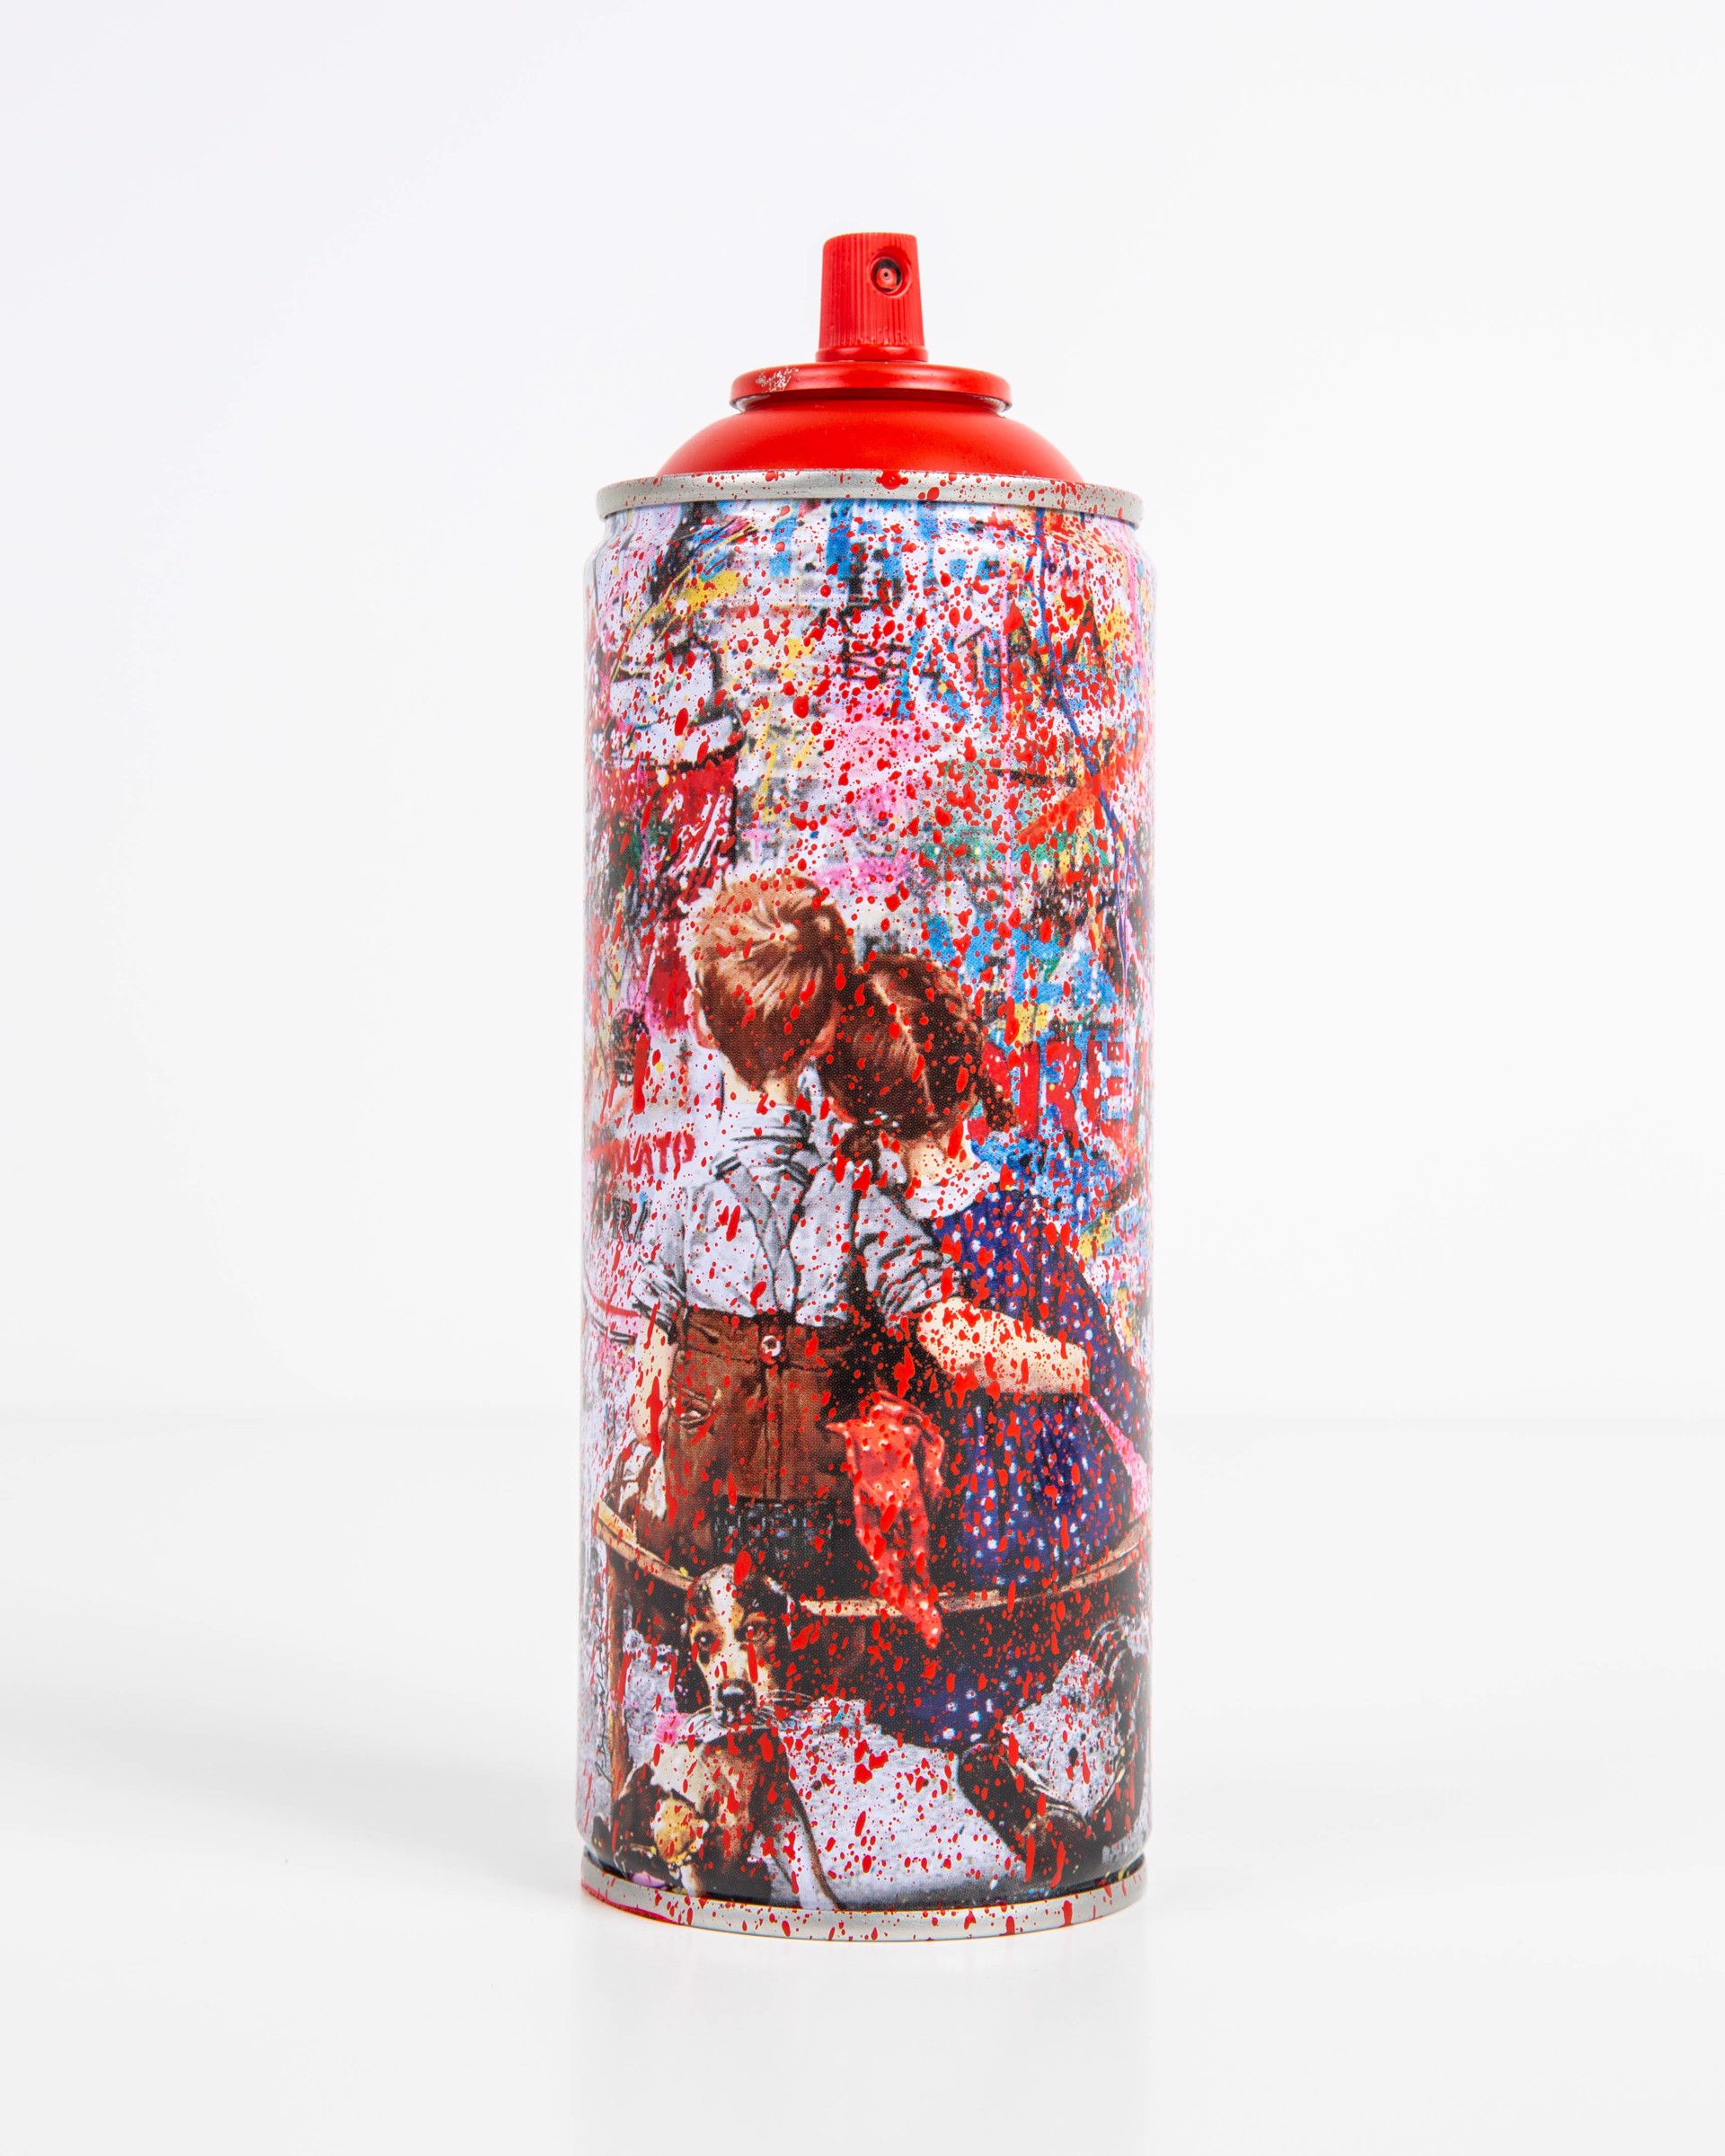 Work Well Together - Red by Mr.Brainwash